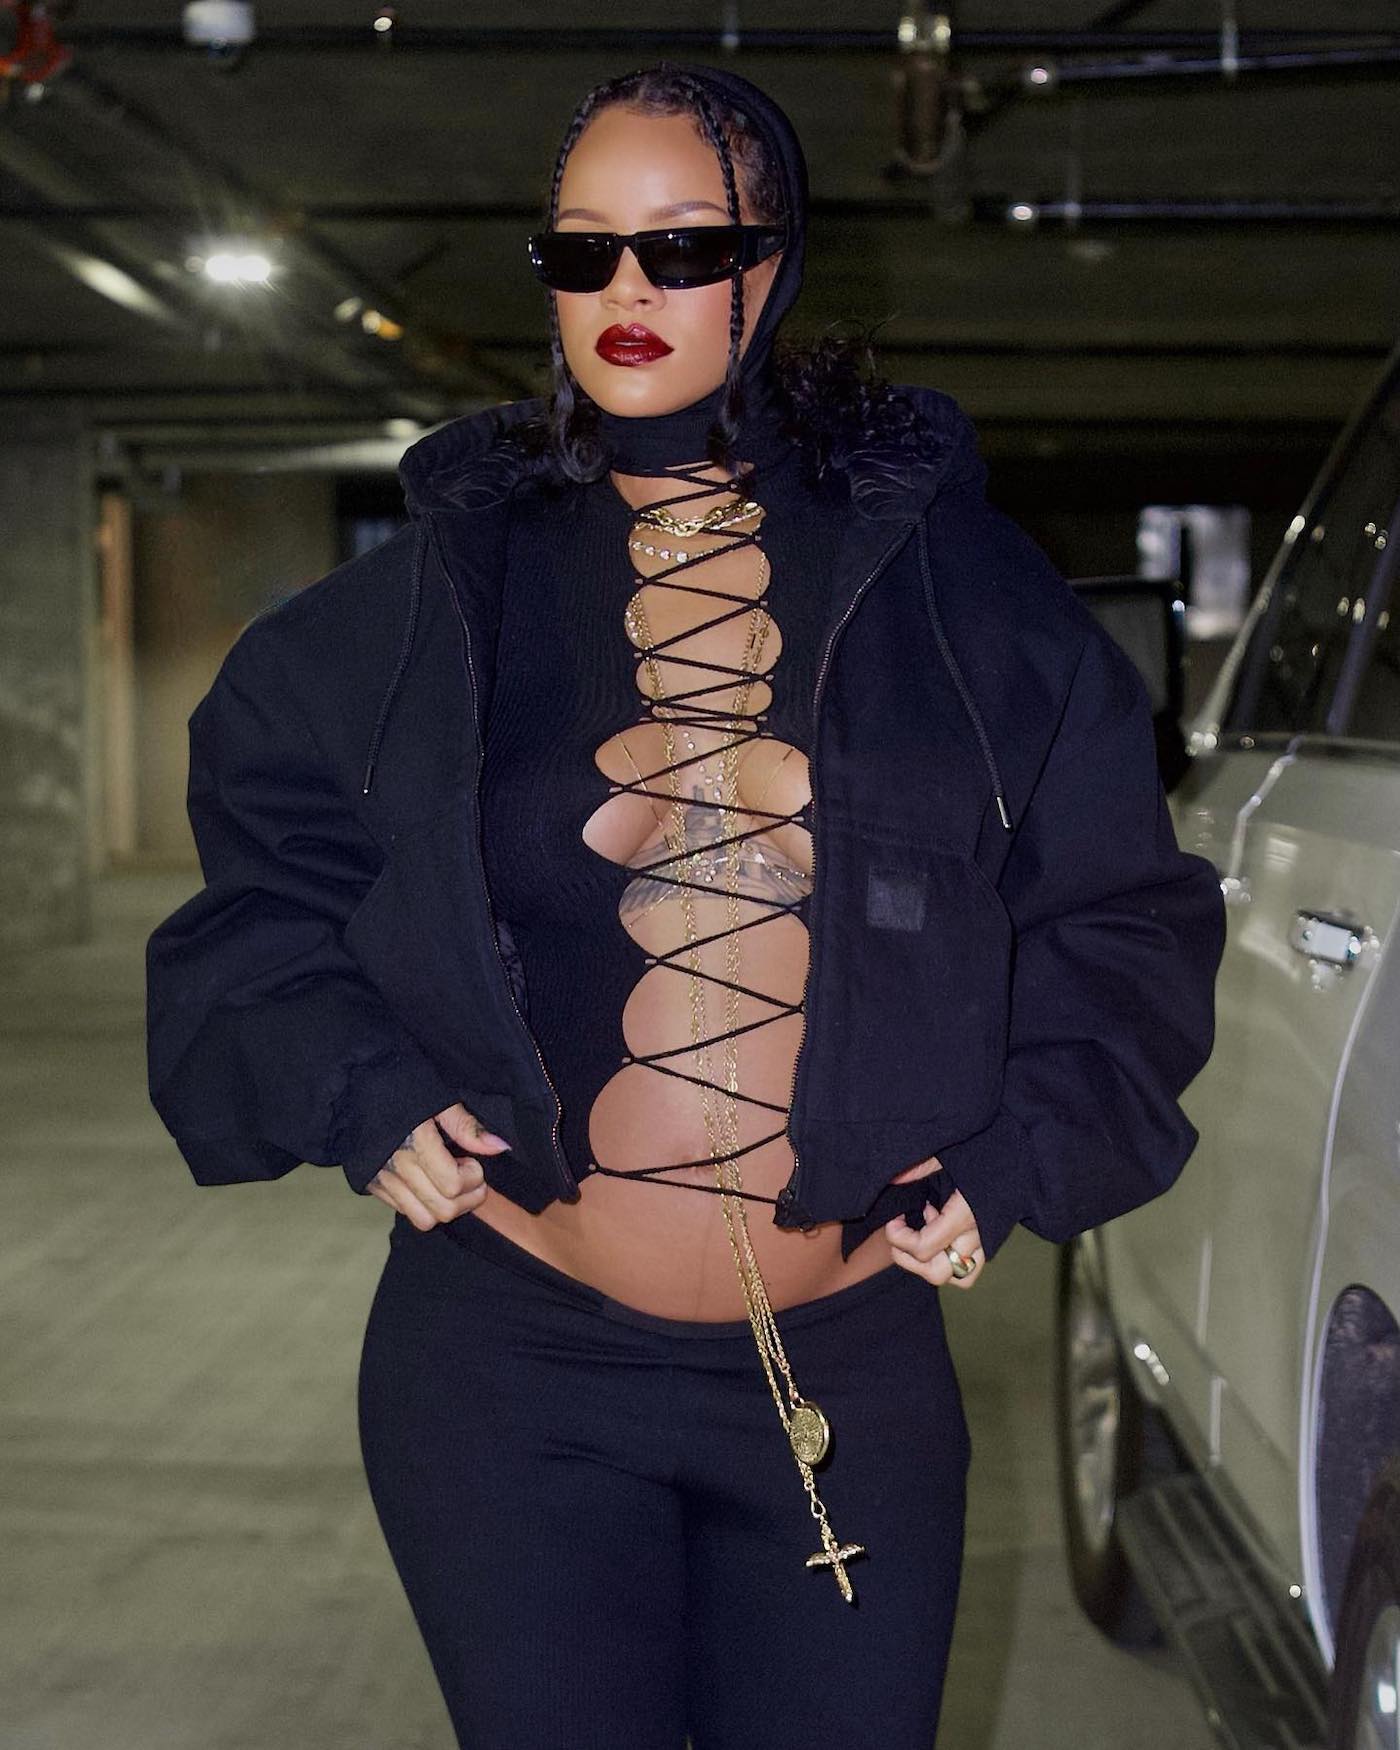 Pregnant Rihanna Shows Off Her Baby Bump In Lace-Up Top Outfit 1